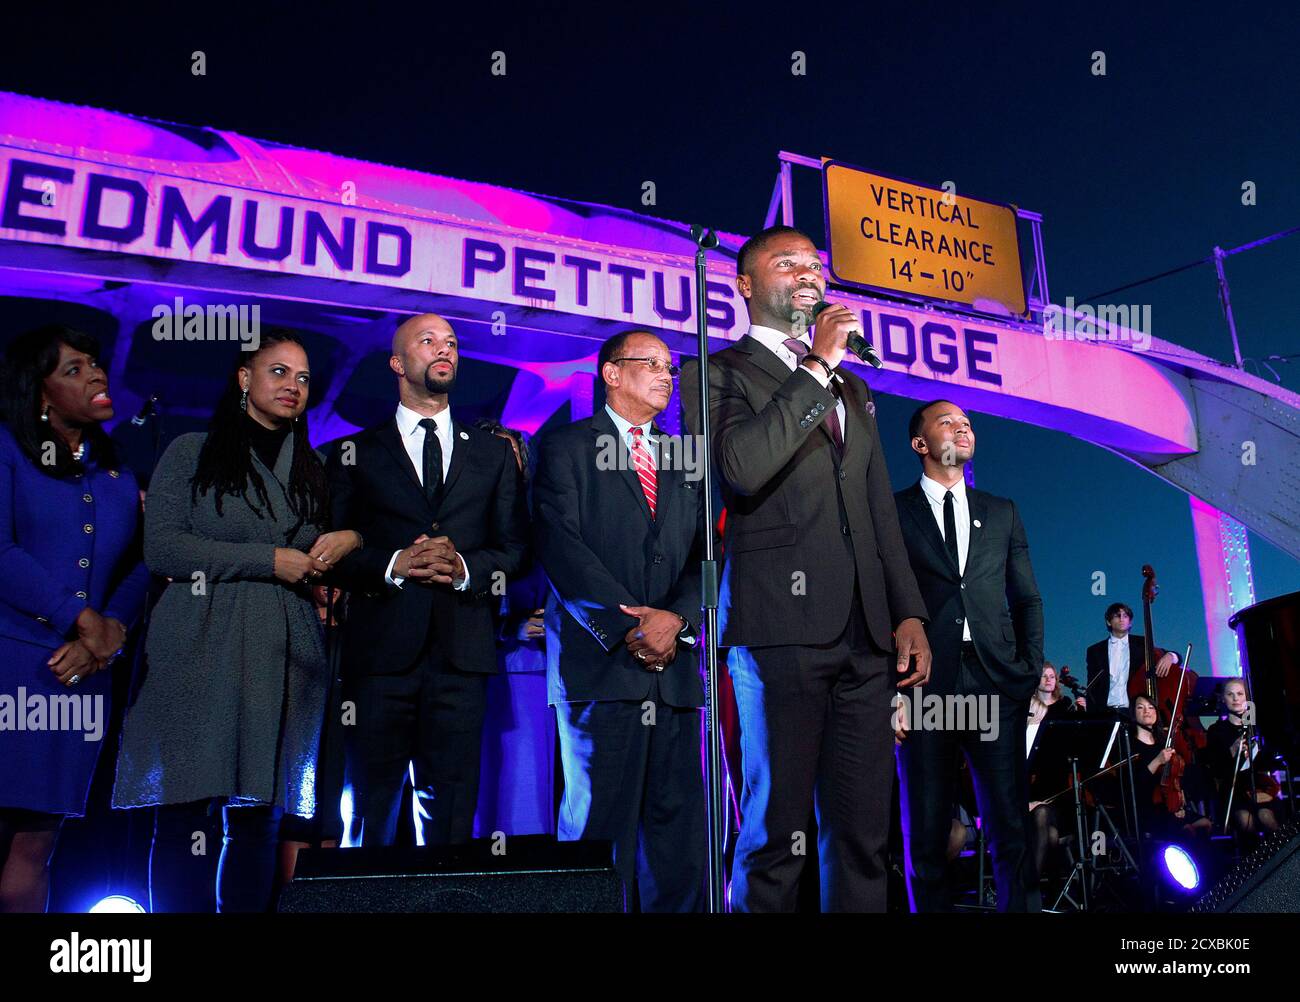 Actor David Oyelowo (front), who portrays Martin Luther King Jr. in the movie 'Selma', speaks at the Edmund Pettus Bridge as (rear L-R) Congresswoman Terri Sewell, director Ava DuVernay, cast member Common, Selma mayor George Evans, and musician John Legend listen in Selma, Alabama January 18, 2015. Stars of the Oscar-nominated movie 'Selma' marched with thousands of people in the Alabama city on Sunday afternoon in honor of Martin Luther King Jr.'s birthday.   REUTERS/Tami Chappell  (UNITED STATES - Tags: ENTERTAINMENT POLITICS ANNIVERSARY) Stock Photo